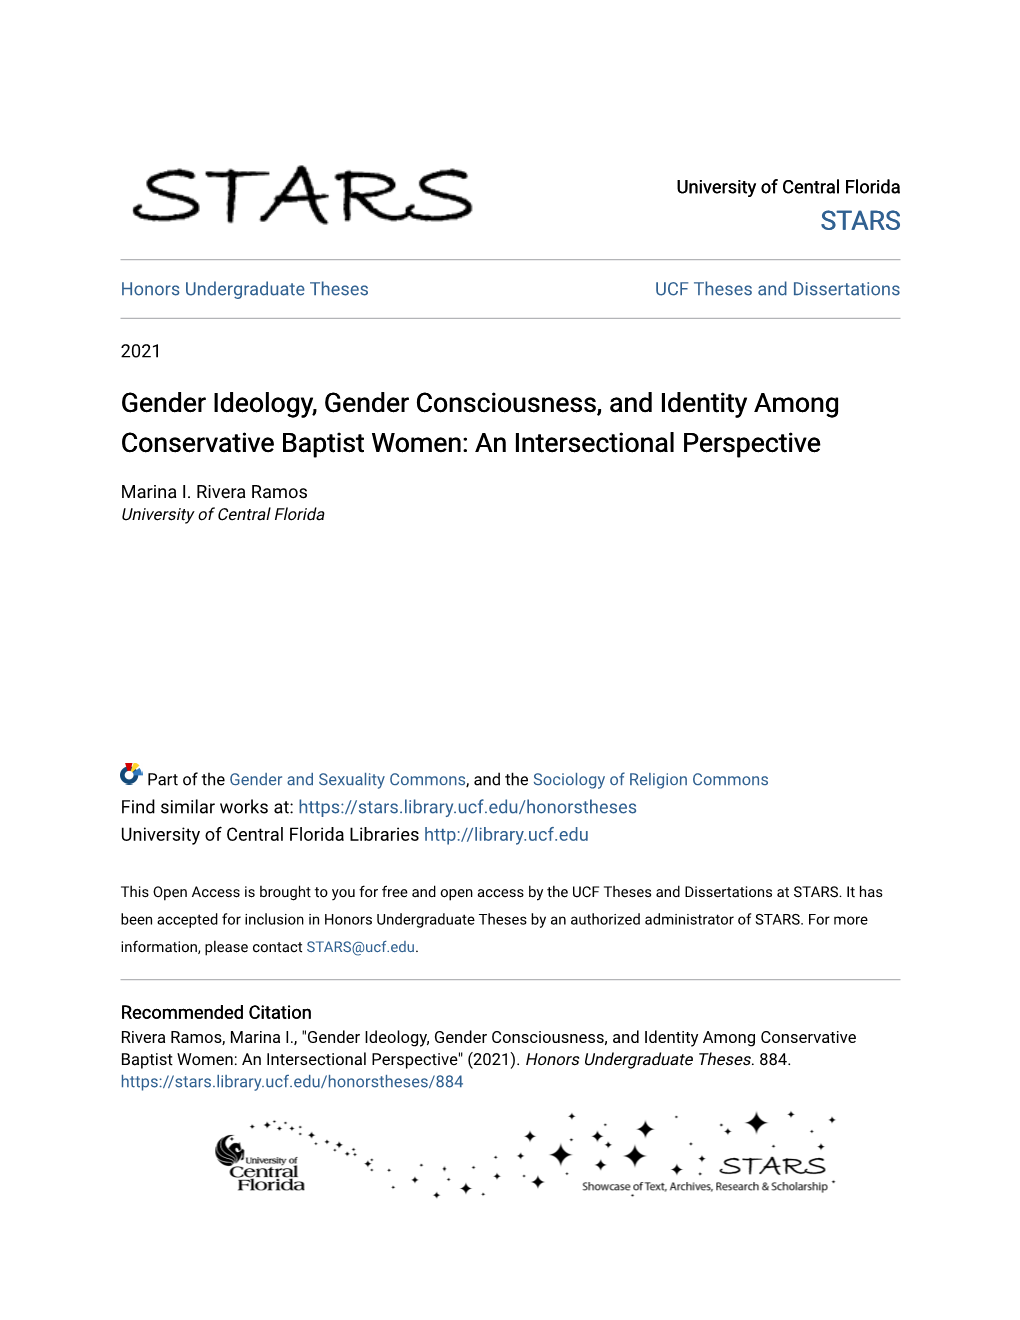 Gender Ideology, Gender Consciousness, and Identity Among Conservative Baptist Women: an Intersectional Perspective